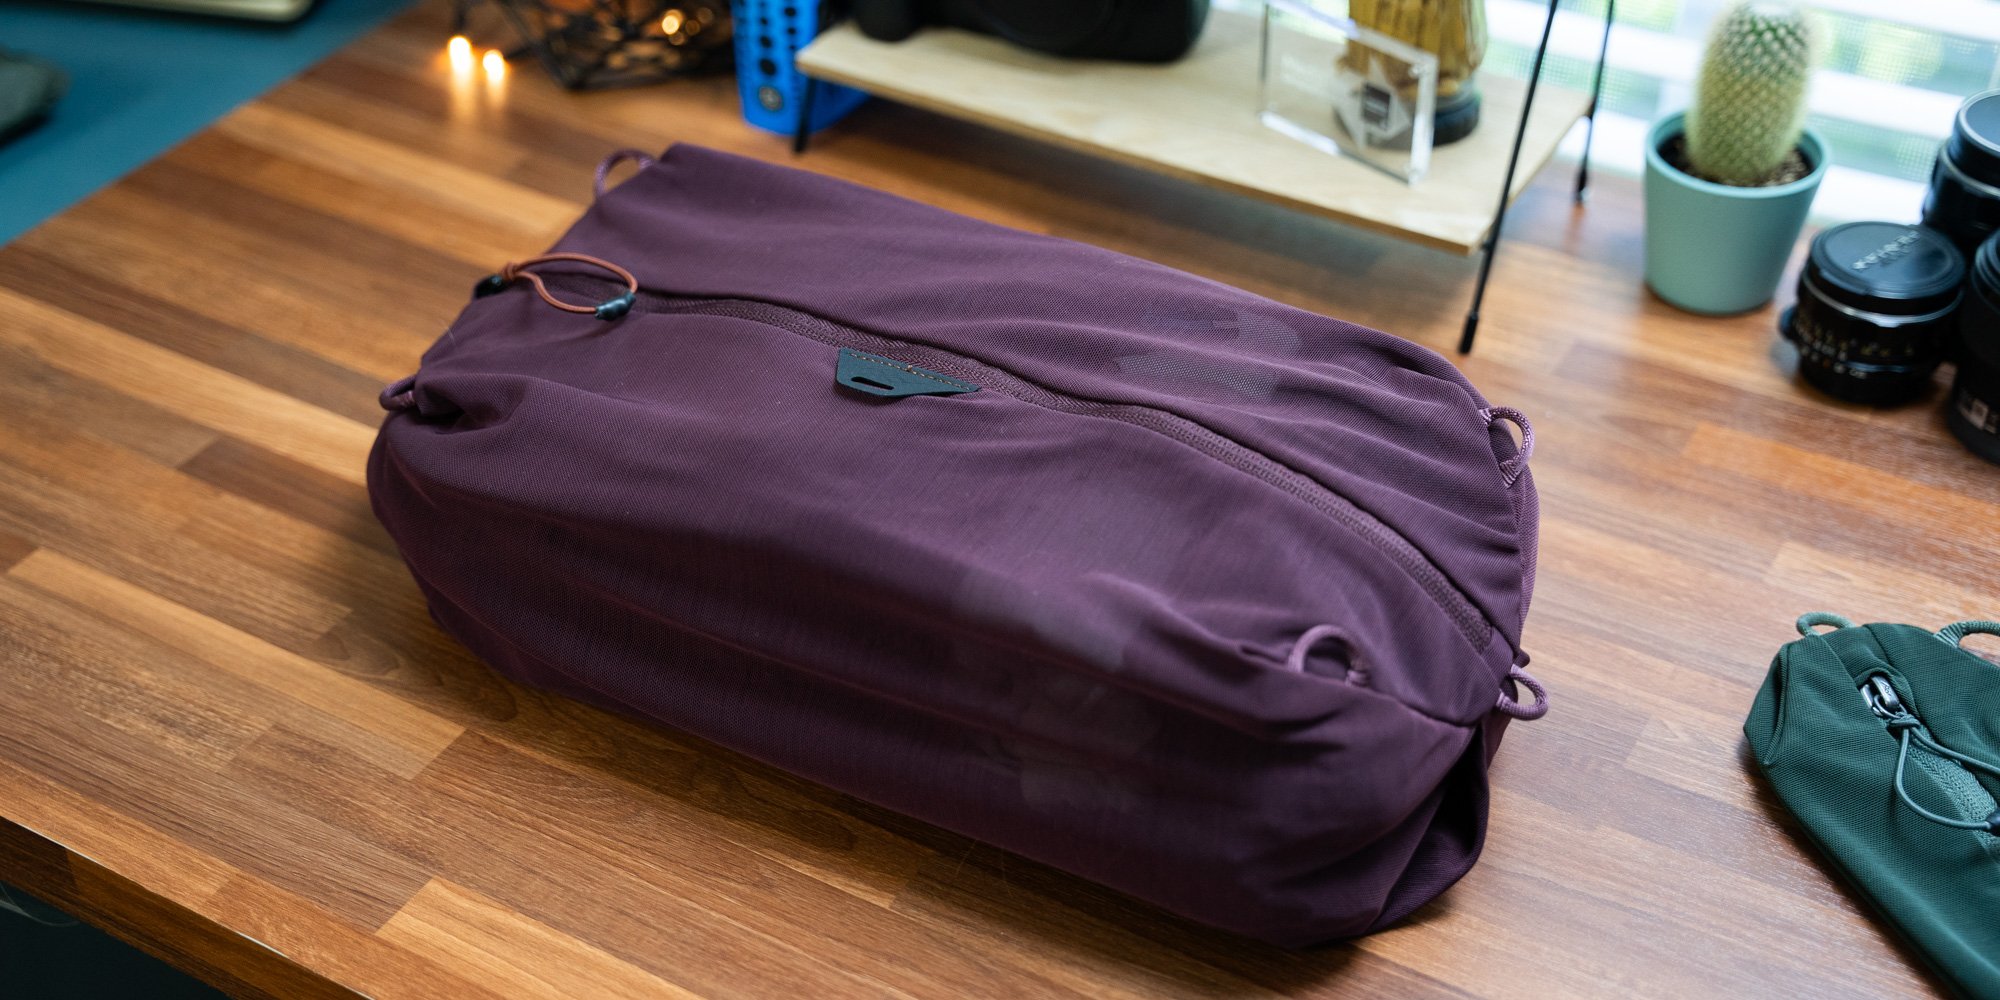 Hands-on with Peak Design's new duffel sizes and packing cubes